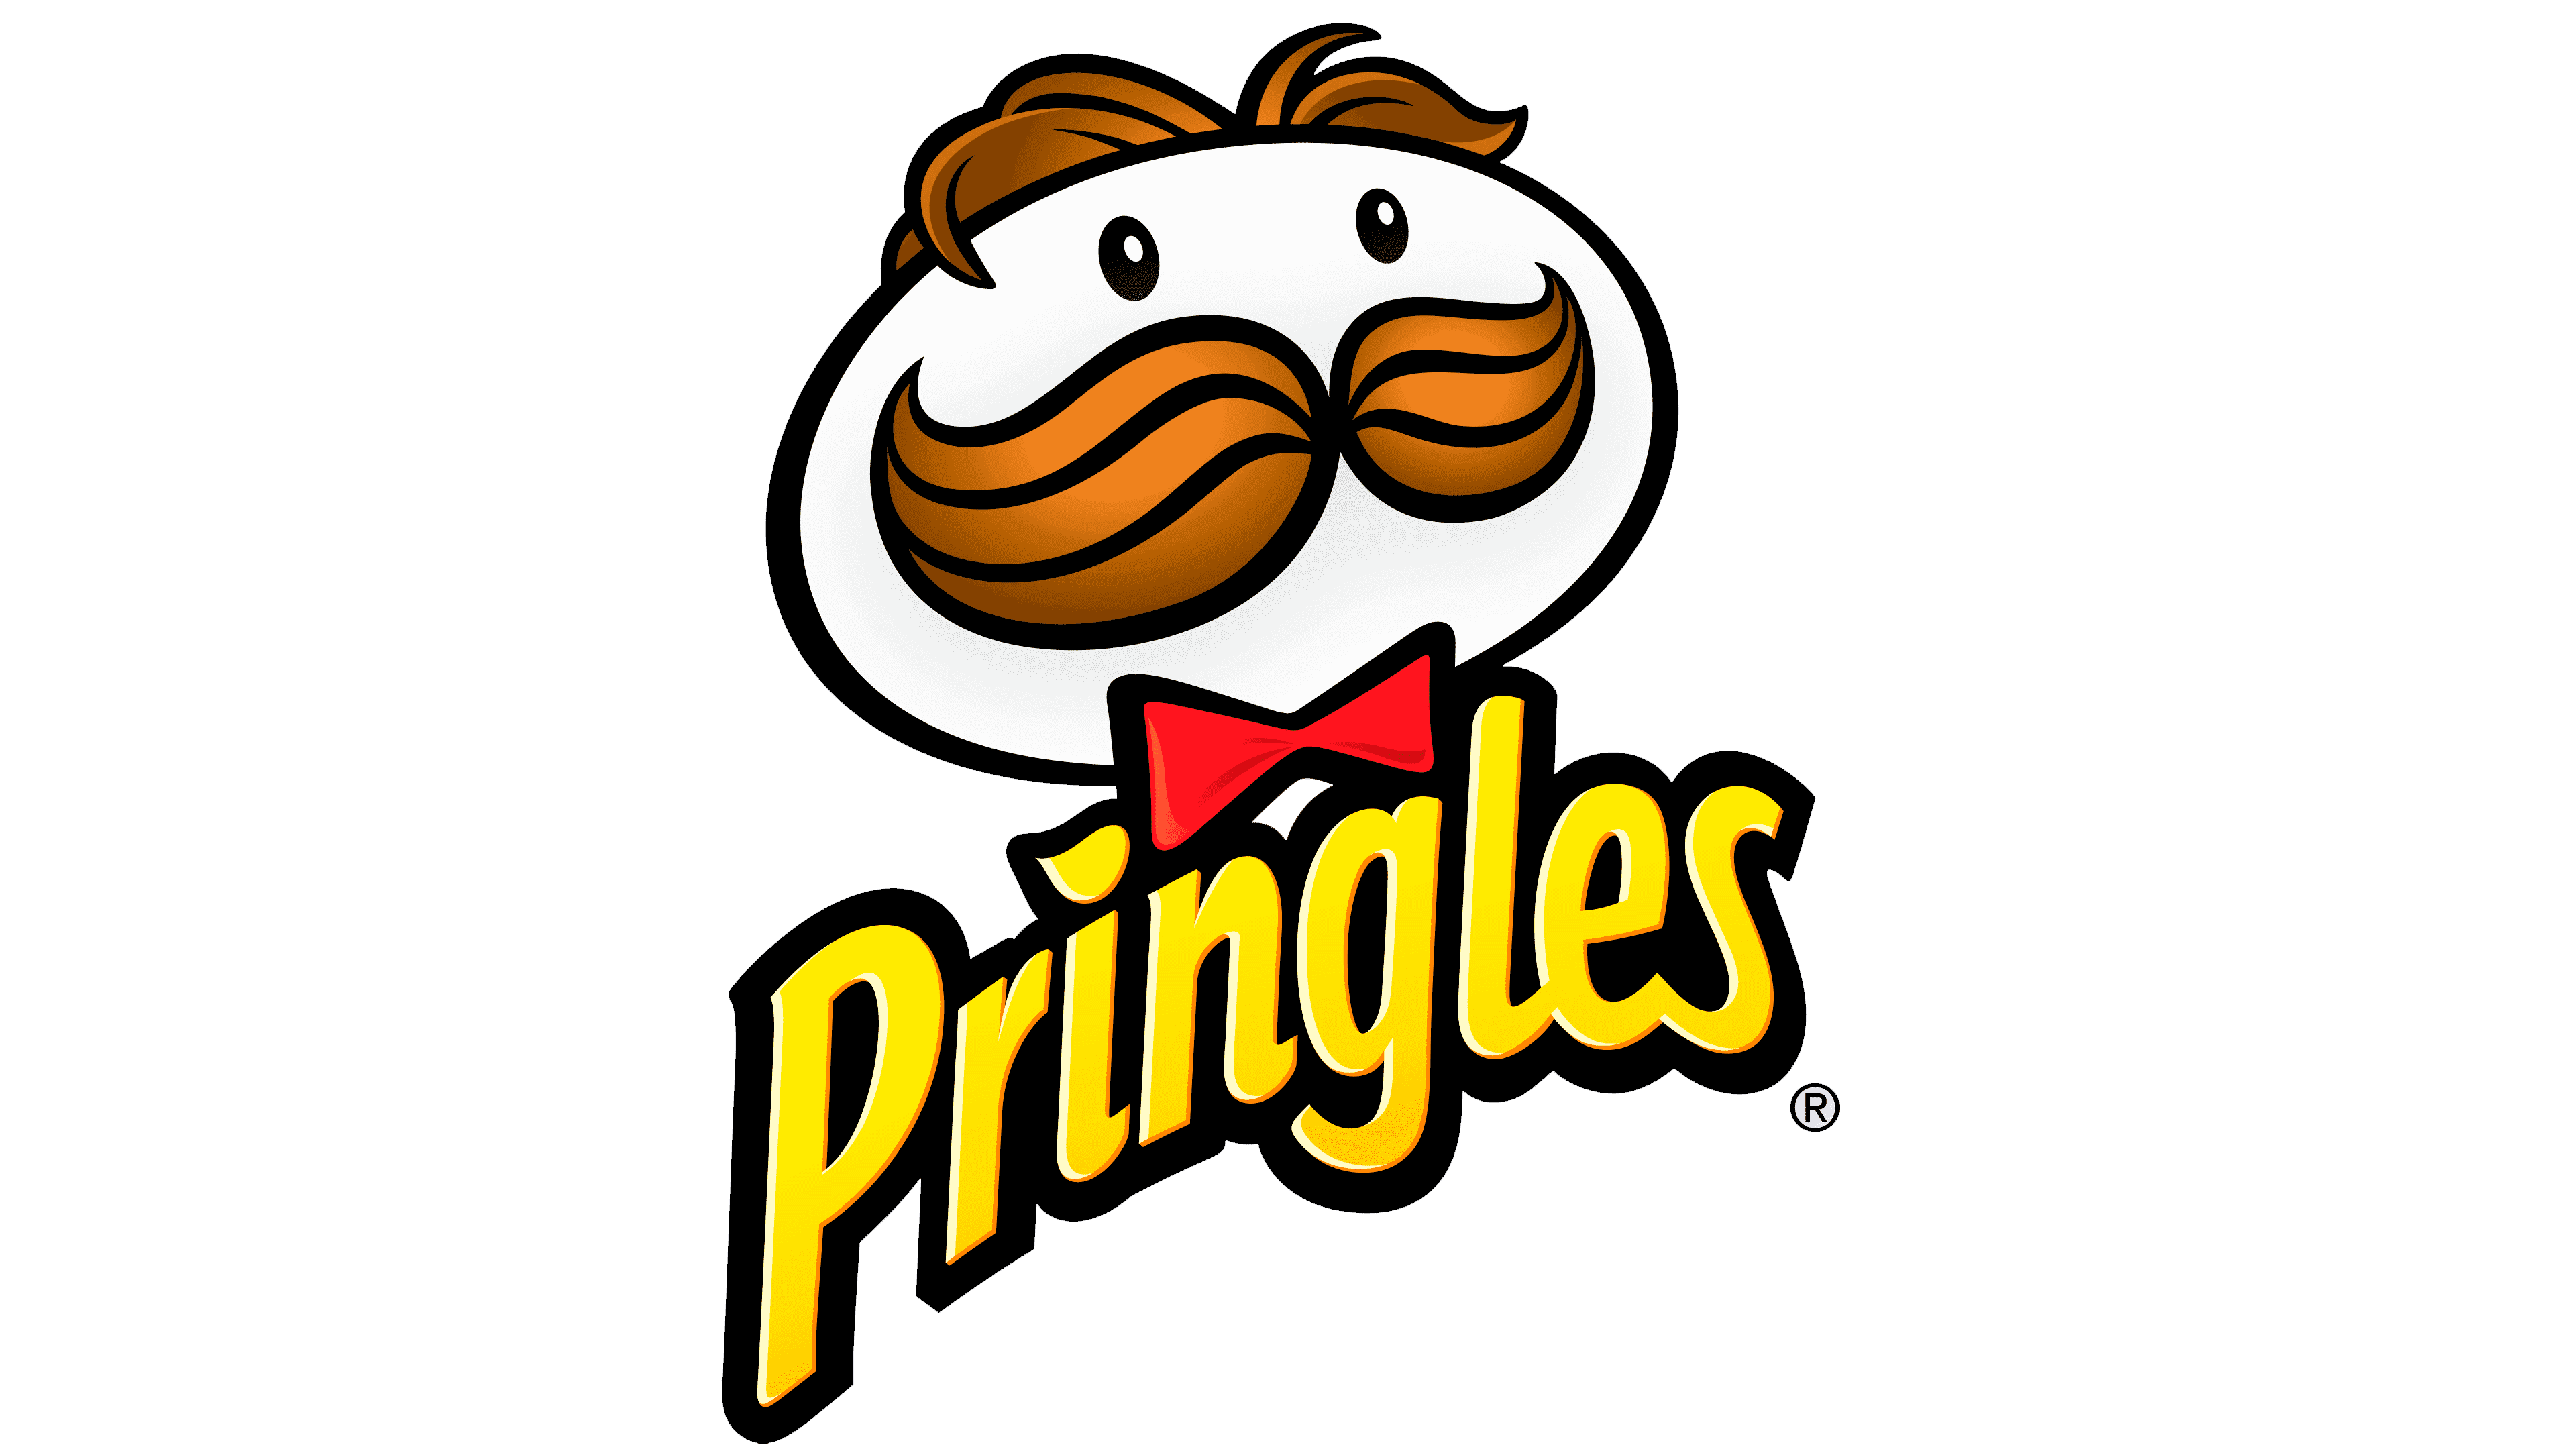 Pringles Logo | Pringles Products Sold at Four Star Supply